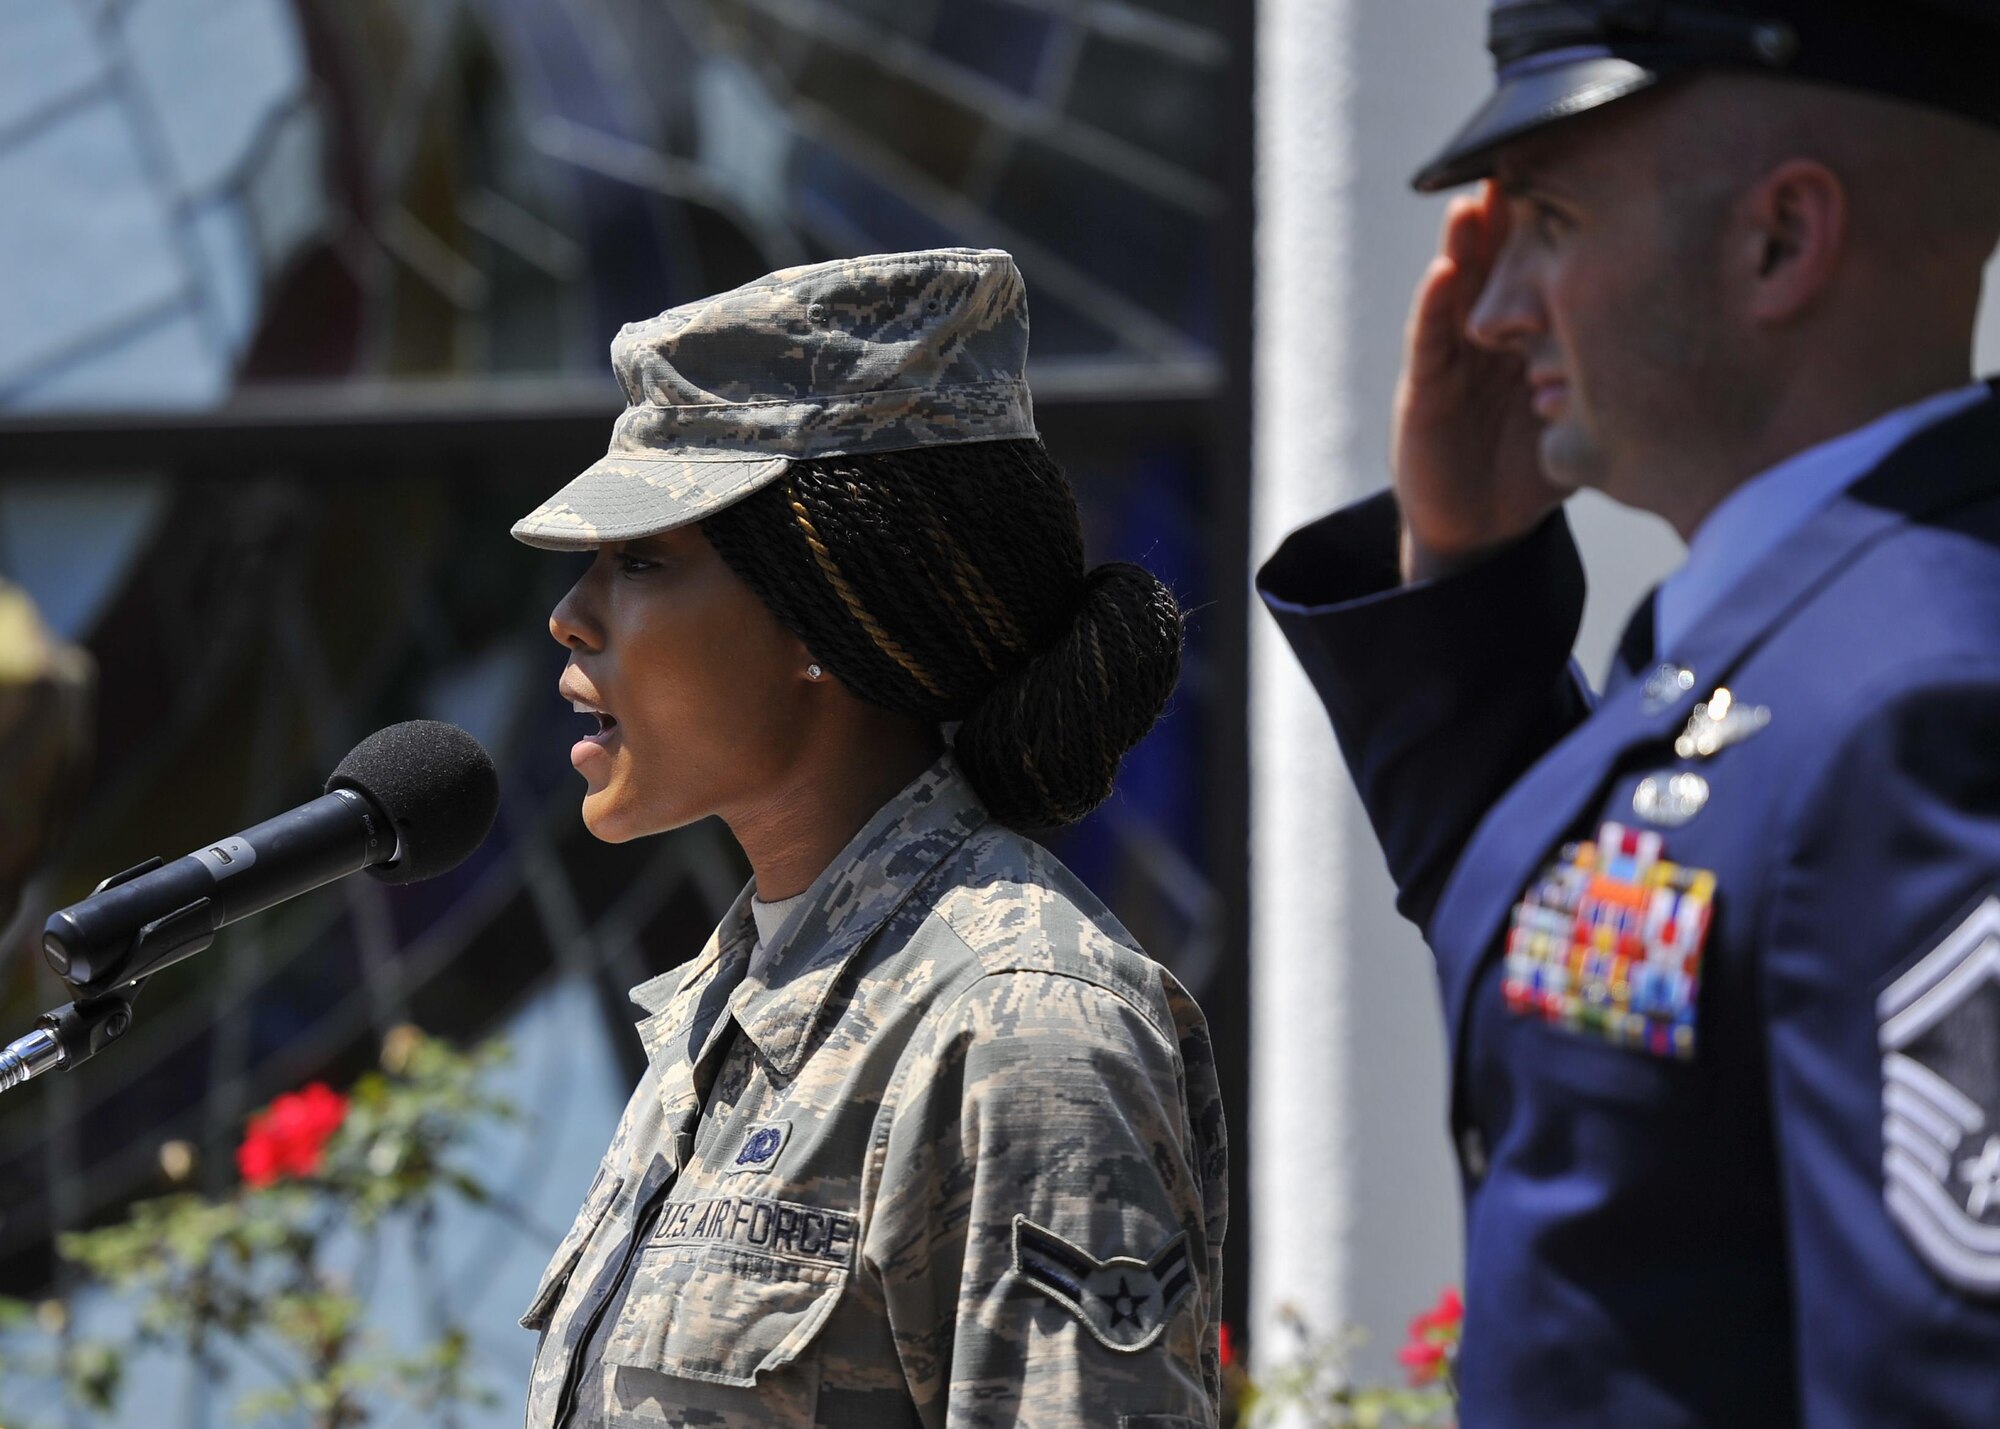 Senior Master Sgt. Kevin Forrest, the superintendent of the 8th Special Operations Squadron, renders a salute while Airman 1st Class Morgan Mclin, a central storage journeyman with the 1st Special Operations Logistics Readiness Squadron, sings the national anthem during a ceremony for the 36th anniversary of Operation Eagle Claw at Hurlburt Field, Fla., April 25, 2016. Operation Eagle Claw, the attempted rescue mission of American hostages from the United States embassy in Iran, ended in disaster at the Desert One refueling site in April 1980. Eight American service members were killed during the mission, resulting in the Holloway Commission to convene and analyze why the mission failed. The recommended corrective actions led to the gradual reorganization and rebirth of United States Special Operations Command in 1987. (U.S. Air Force photo Airman 1st Class Kai White)